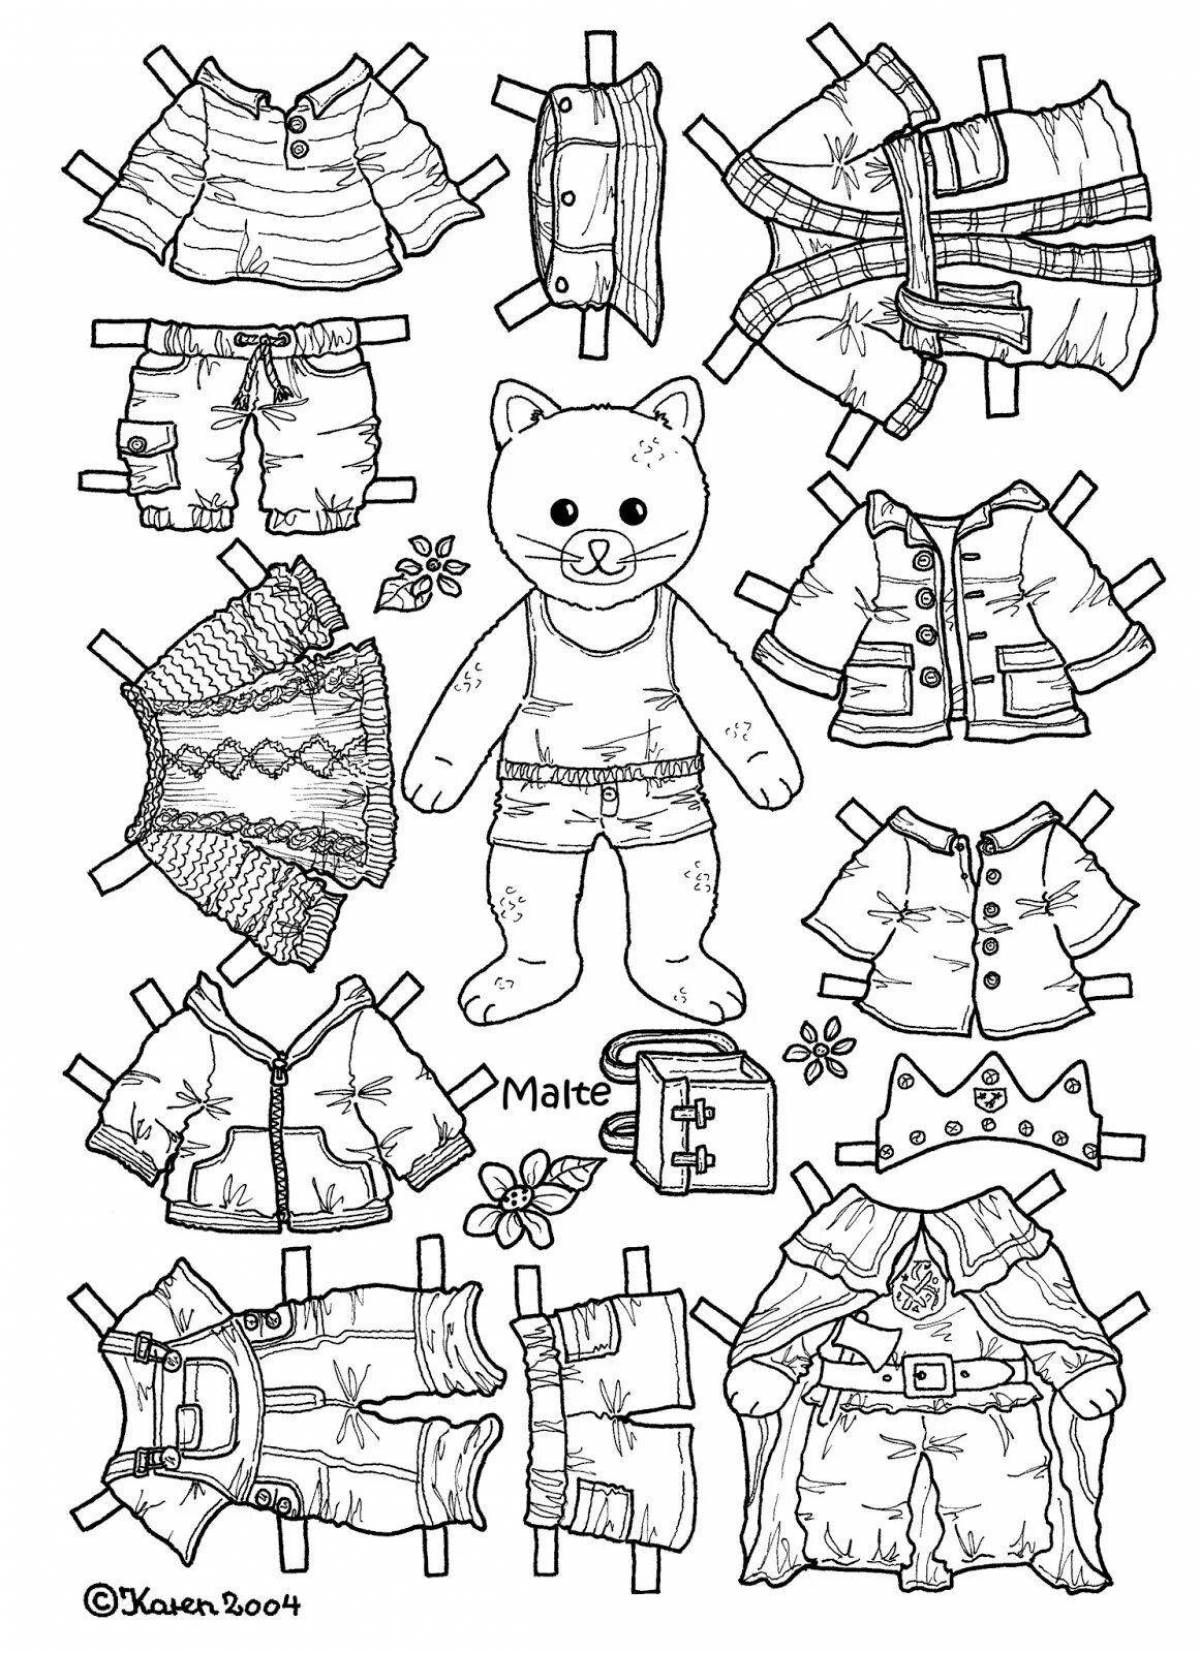 Adorable coloring book animals in clothes